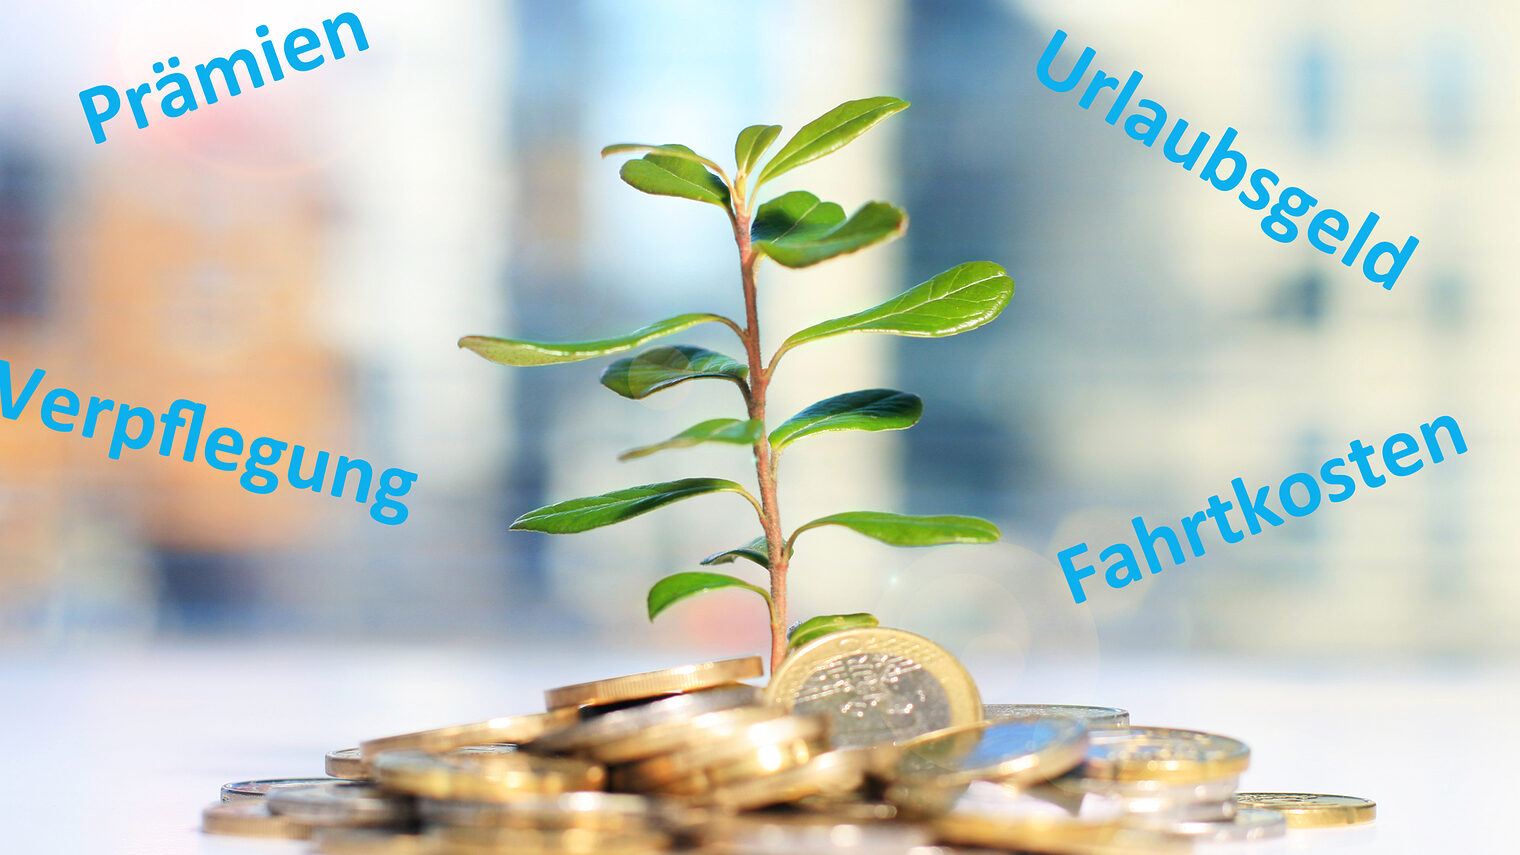 Successful investment. Plant and coins on table. Schlagwort(e): plant, growth, investment, business, success, seed, grow, invest, banking, bank, branch, background, care, cash, coin, concept, currency, earnings, economic, euro, europe, finance, flower, gold, green, heap, help, ideas, interest, loan, many, market, monetary, money, nature, pile, progress, savings, symbol, tree, wealth